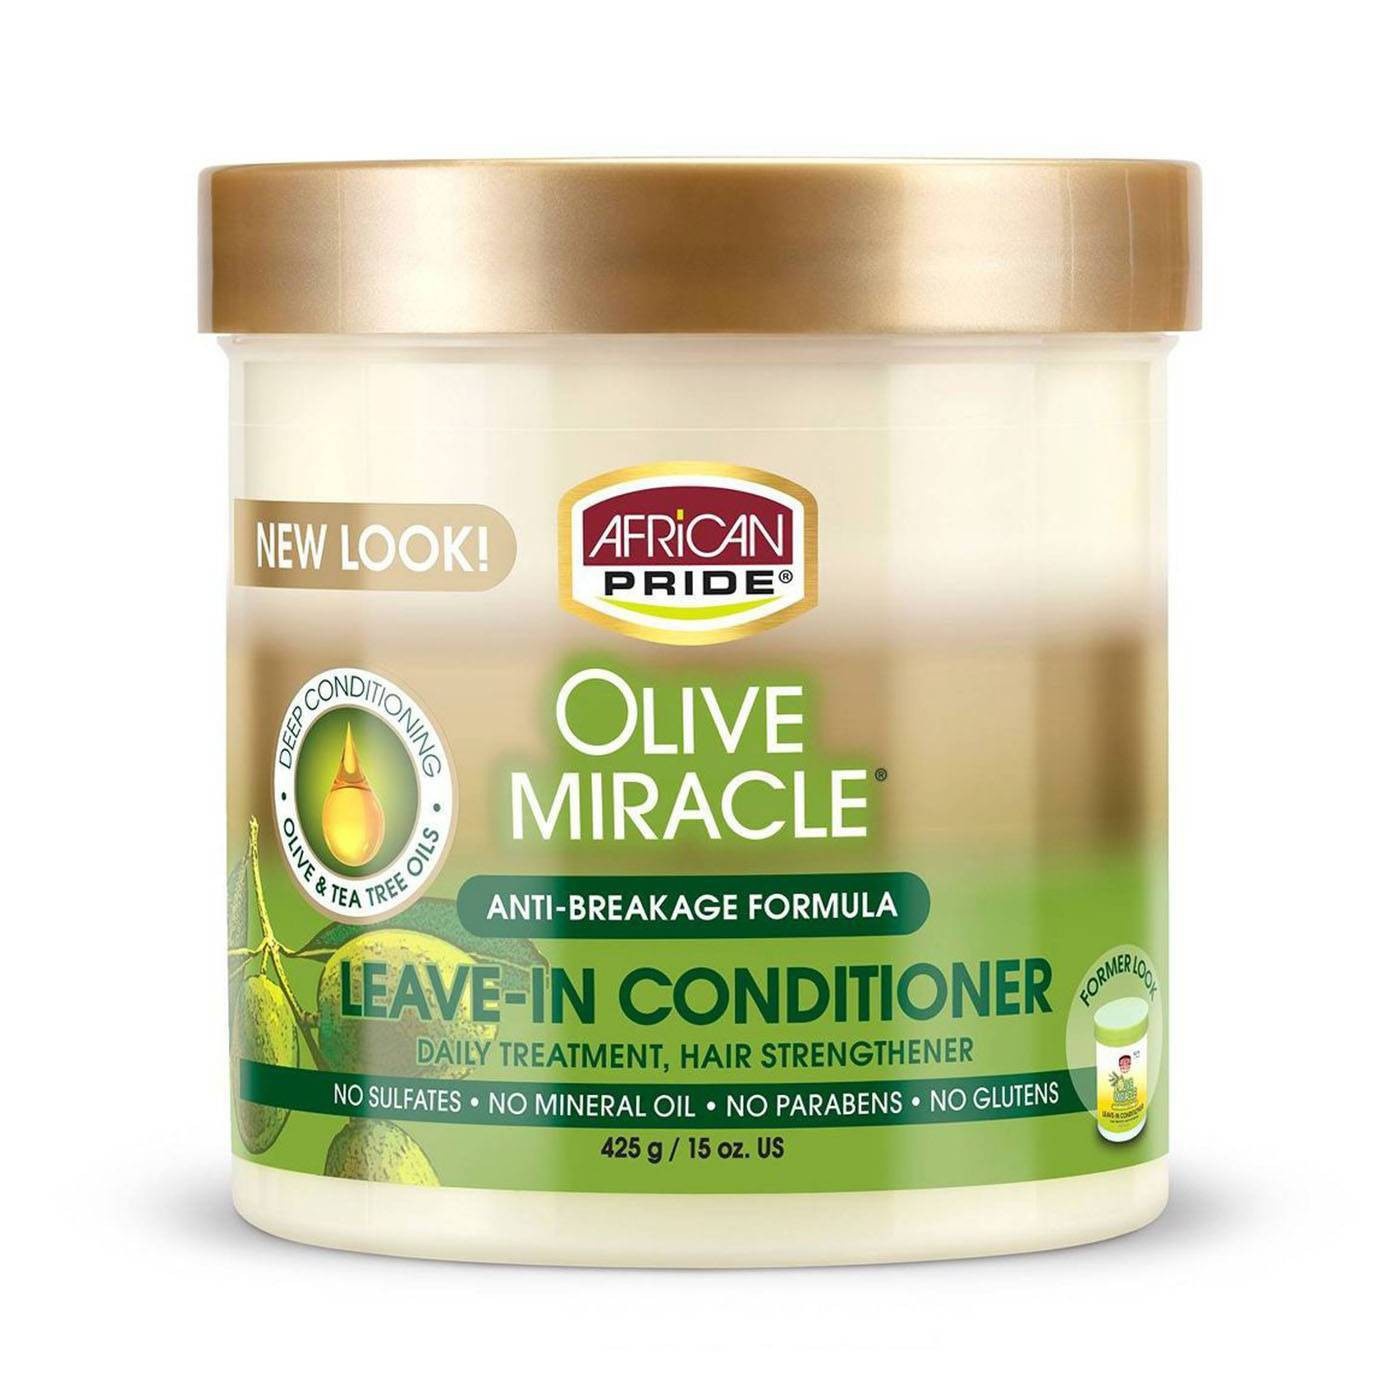 slide 1 of 1, African Pride Olive Miracle Anti-Breakage Leave -In Conditioner Cream - 15oz, 15 oz